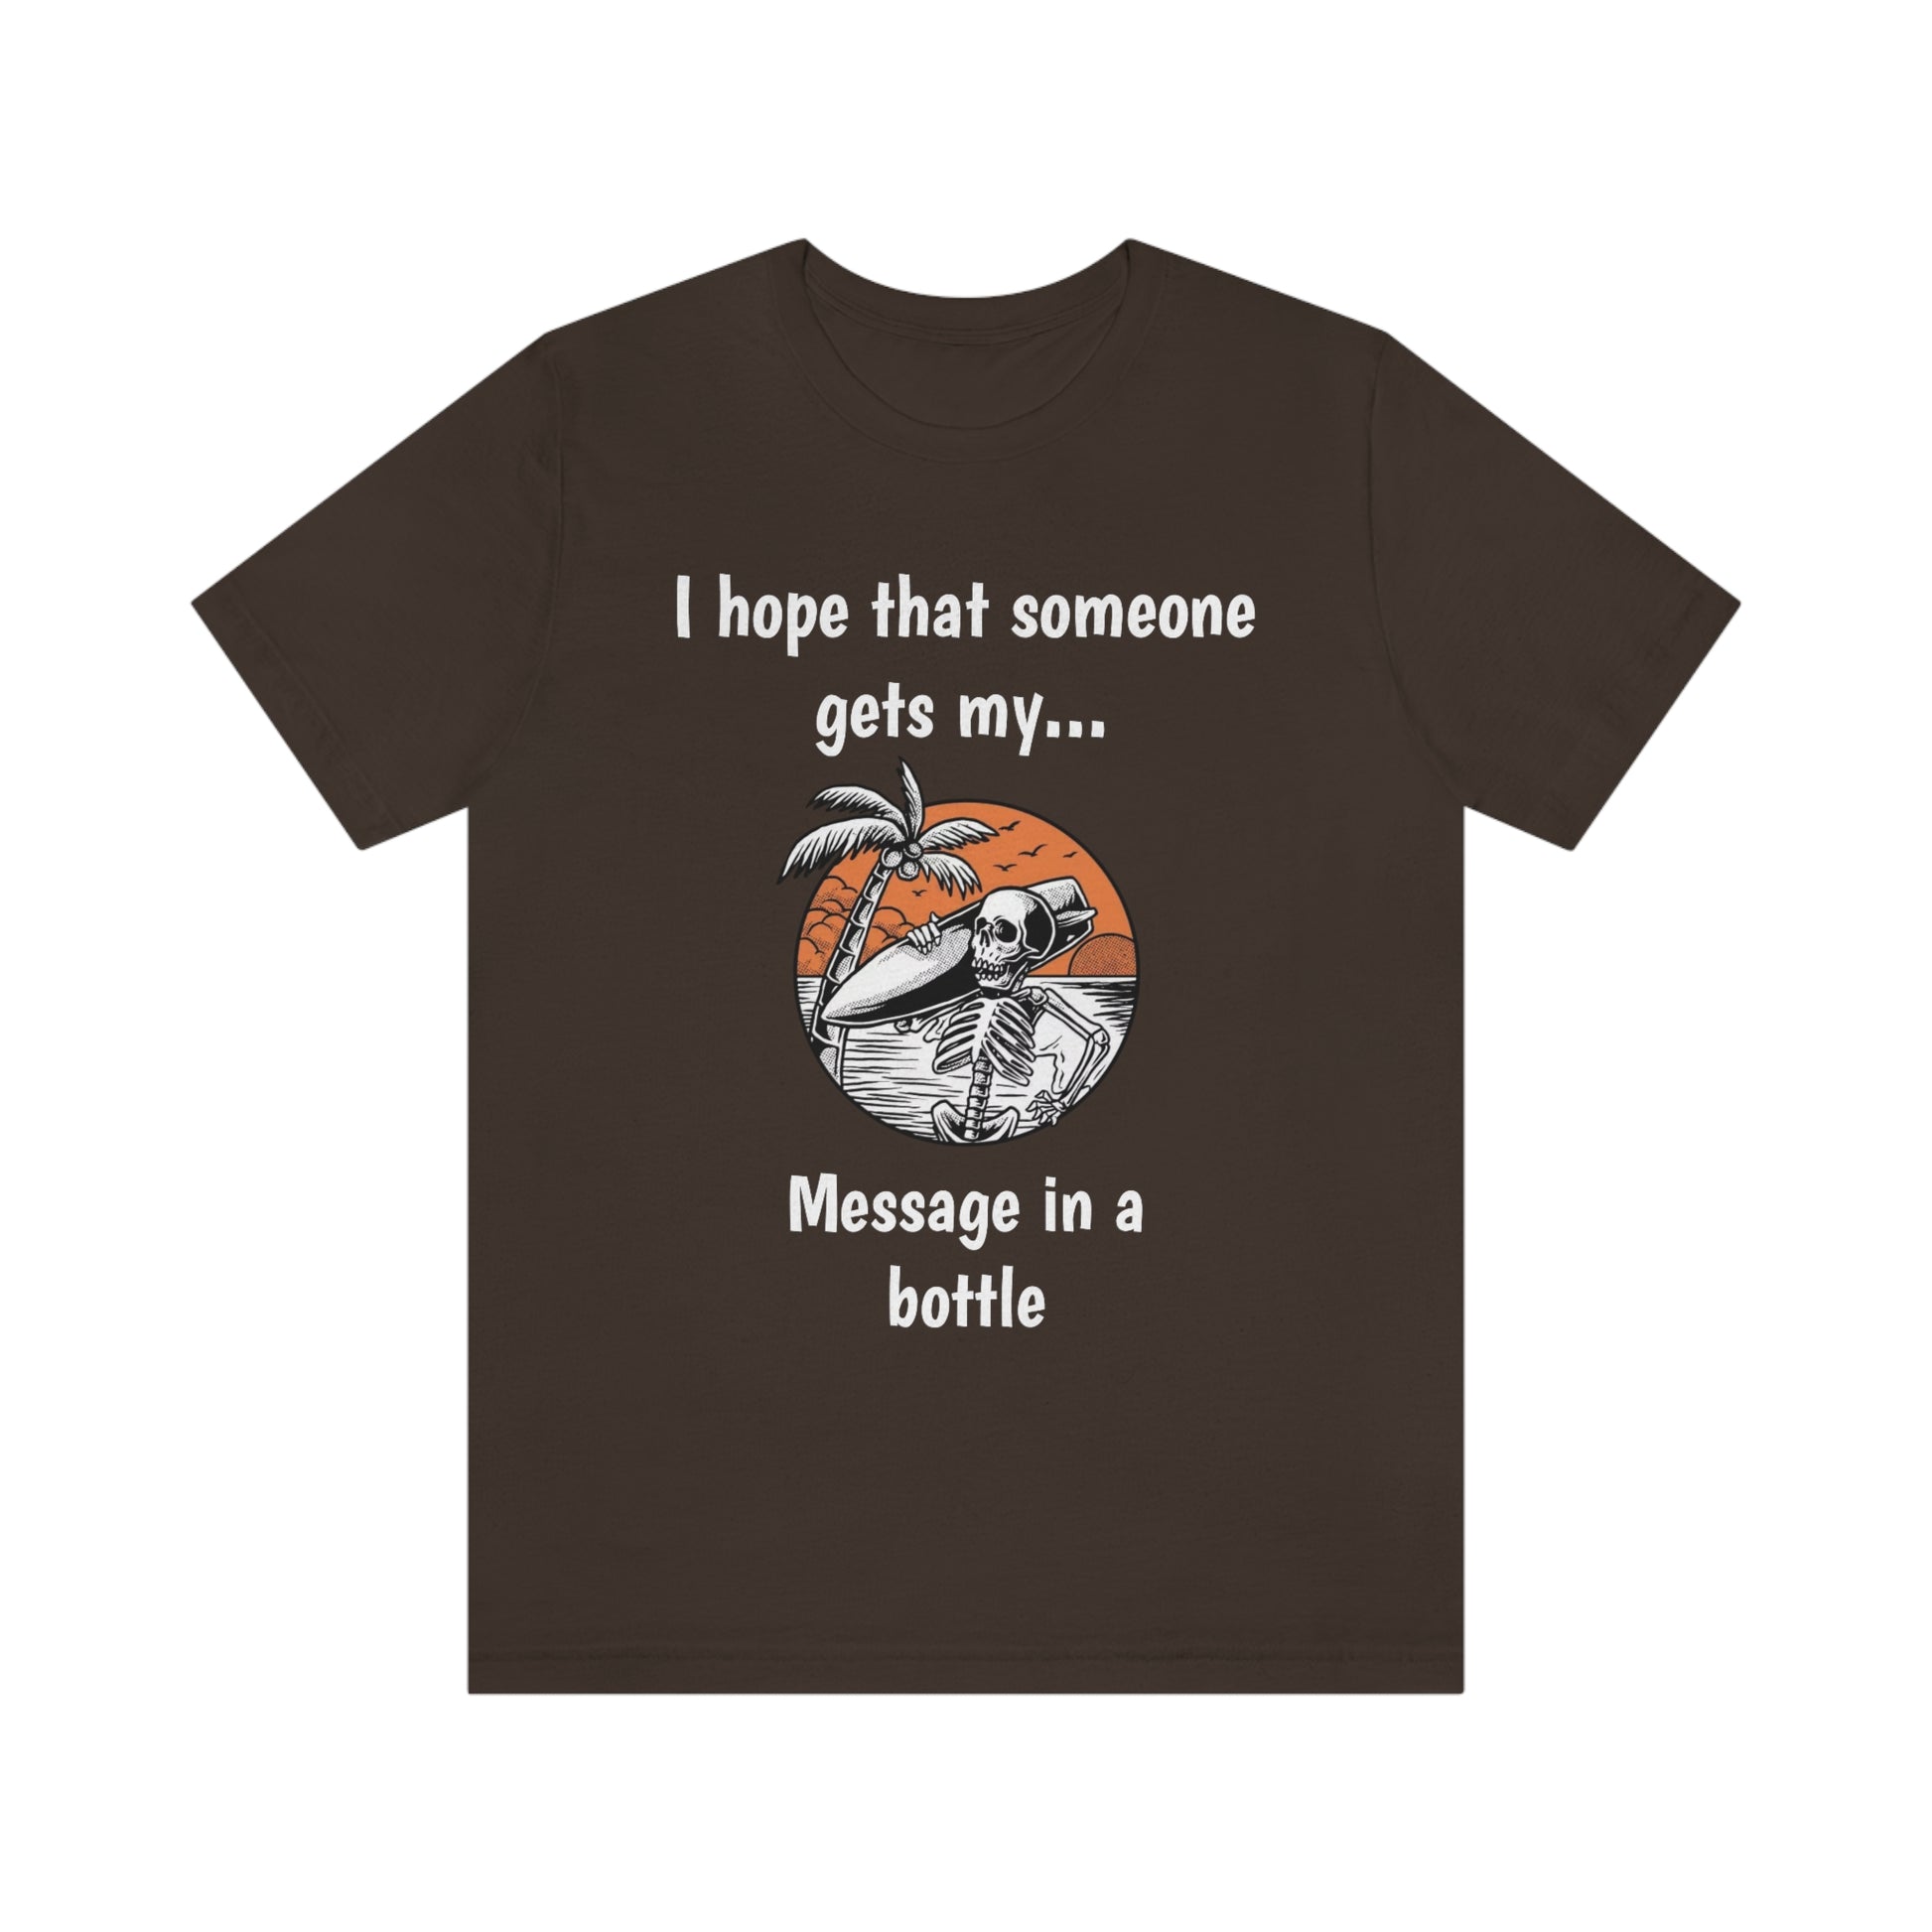 I hope that someone gets my message in a bottle - Fan Shirt - Unisex Short Sleeve Tee - CrazyTomTShirts